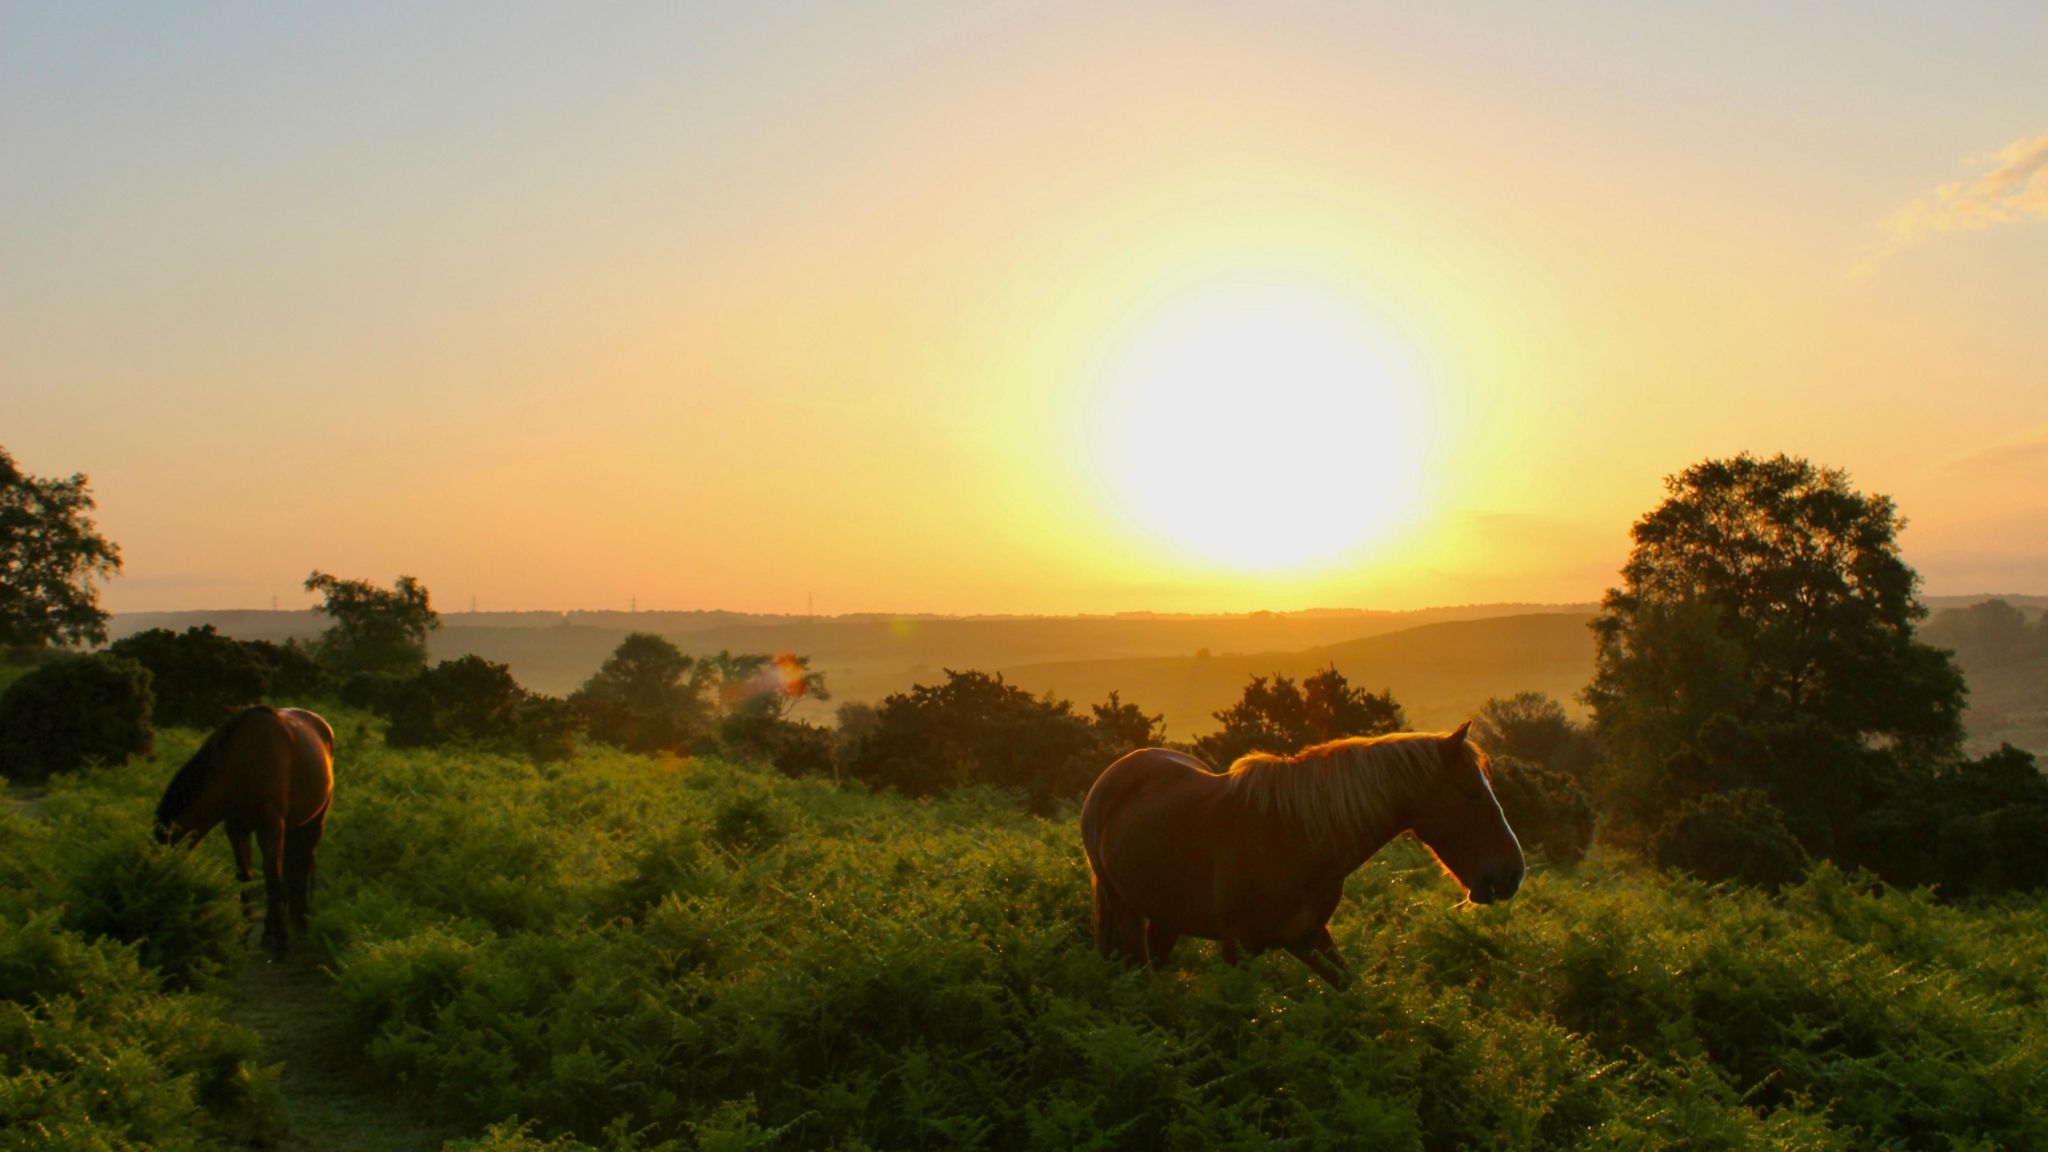 MONDAY - Sunrise over the heathland of the New Forest with two ponies grazing in front of the sun